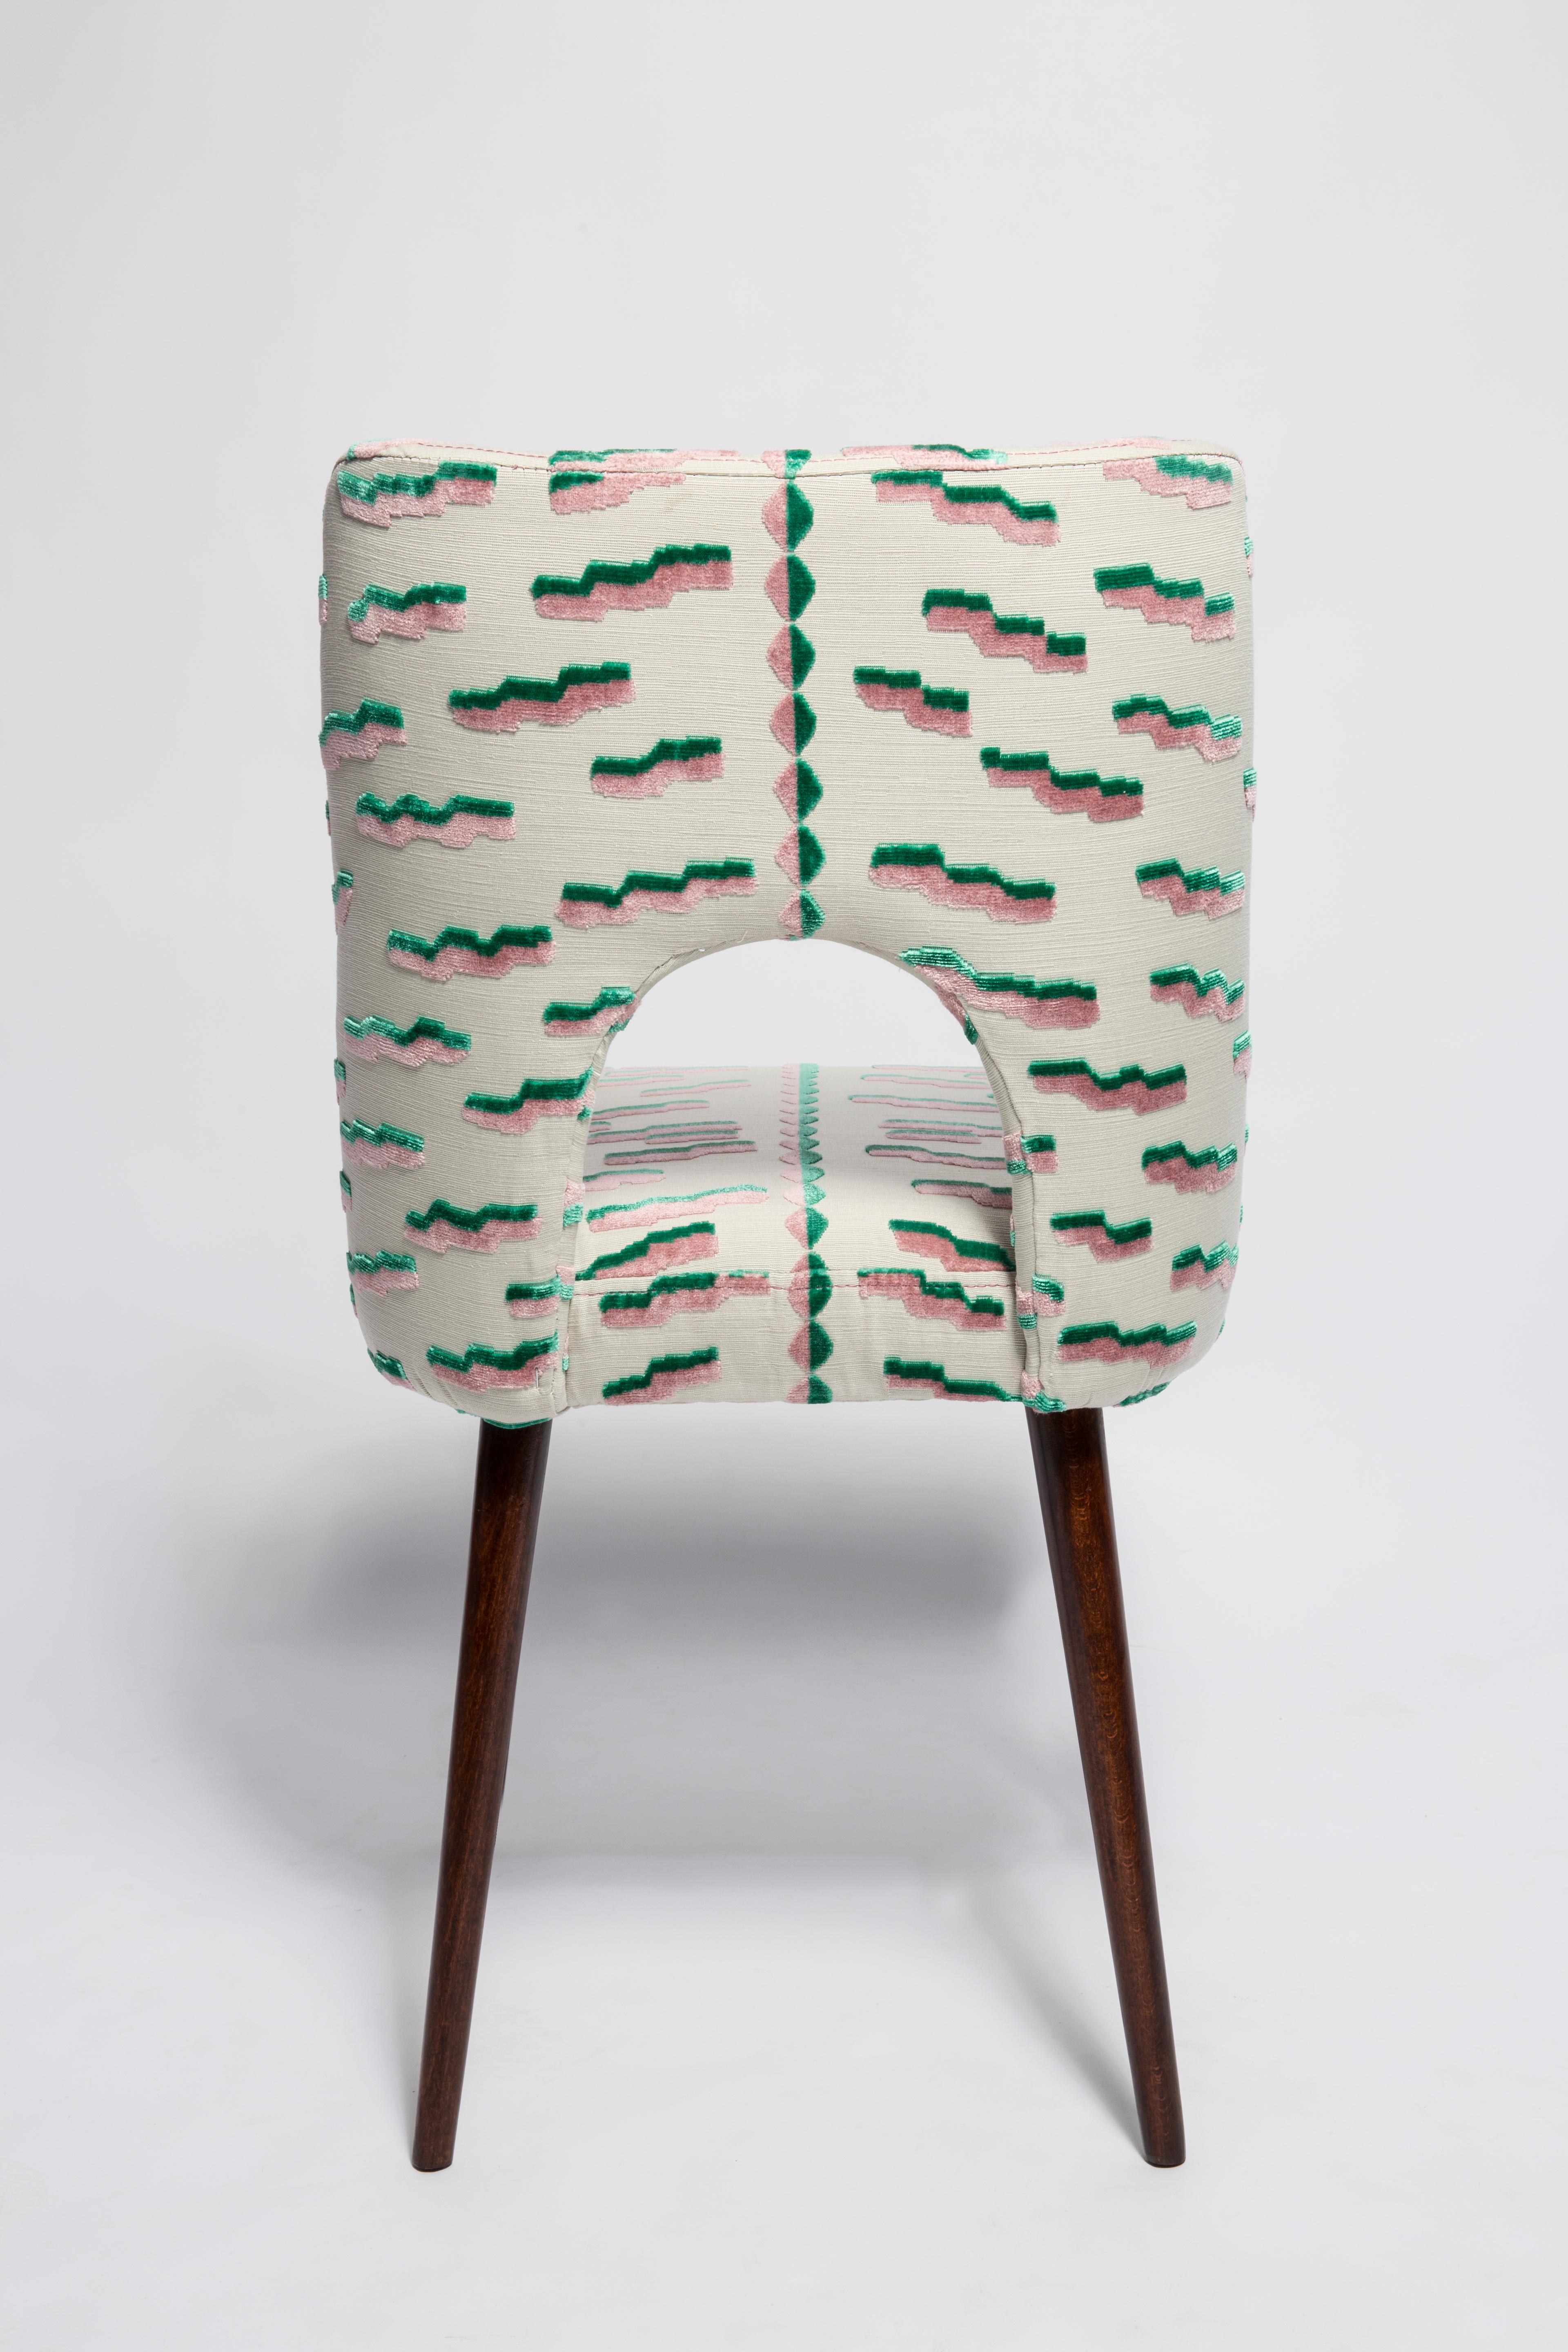 Hand-Crafted Mid Century Pink and Green Tiger Beat Jacquard Velvet Shell Chair, Europe, 1960s For Sale